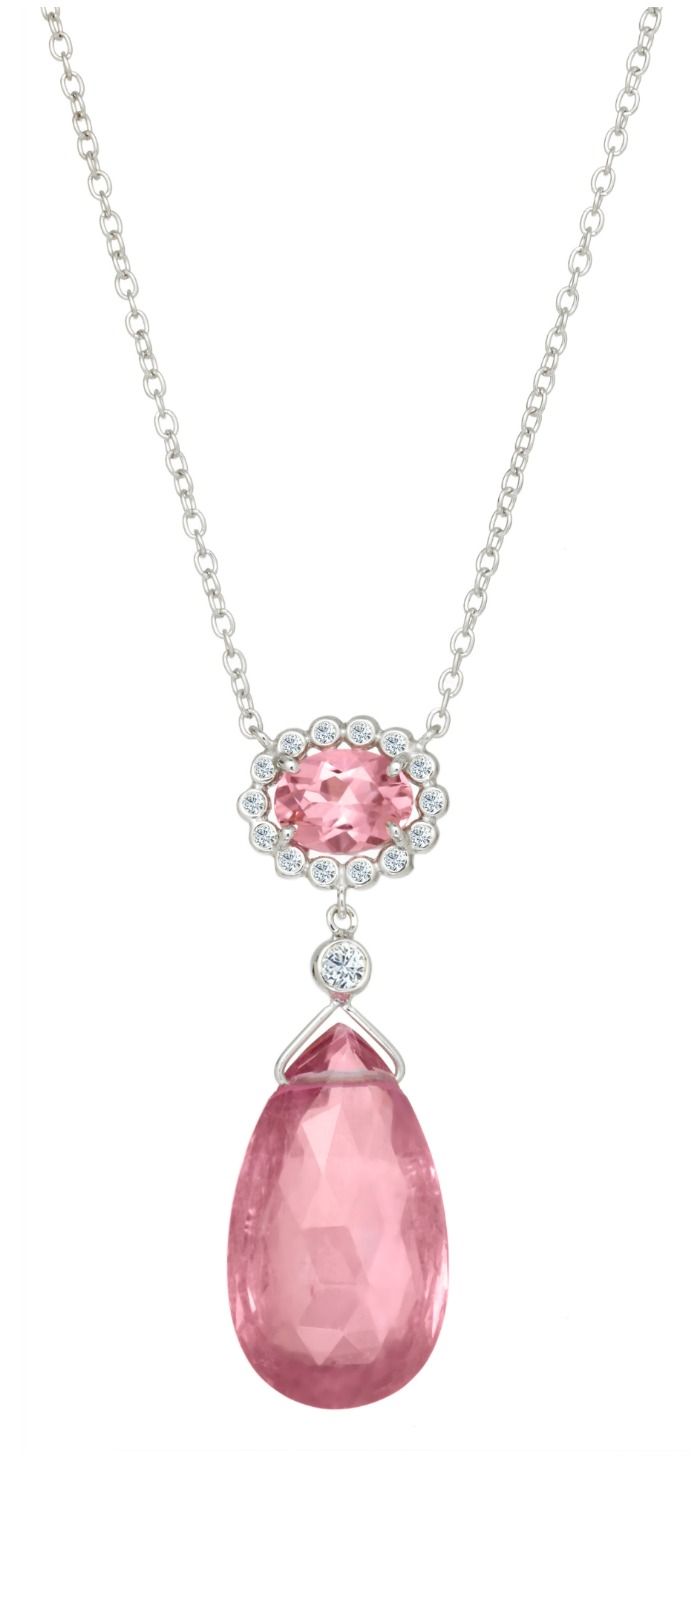 A Suzy Landa pink tourmaline necklace in white gold with diamonds.